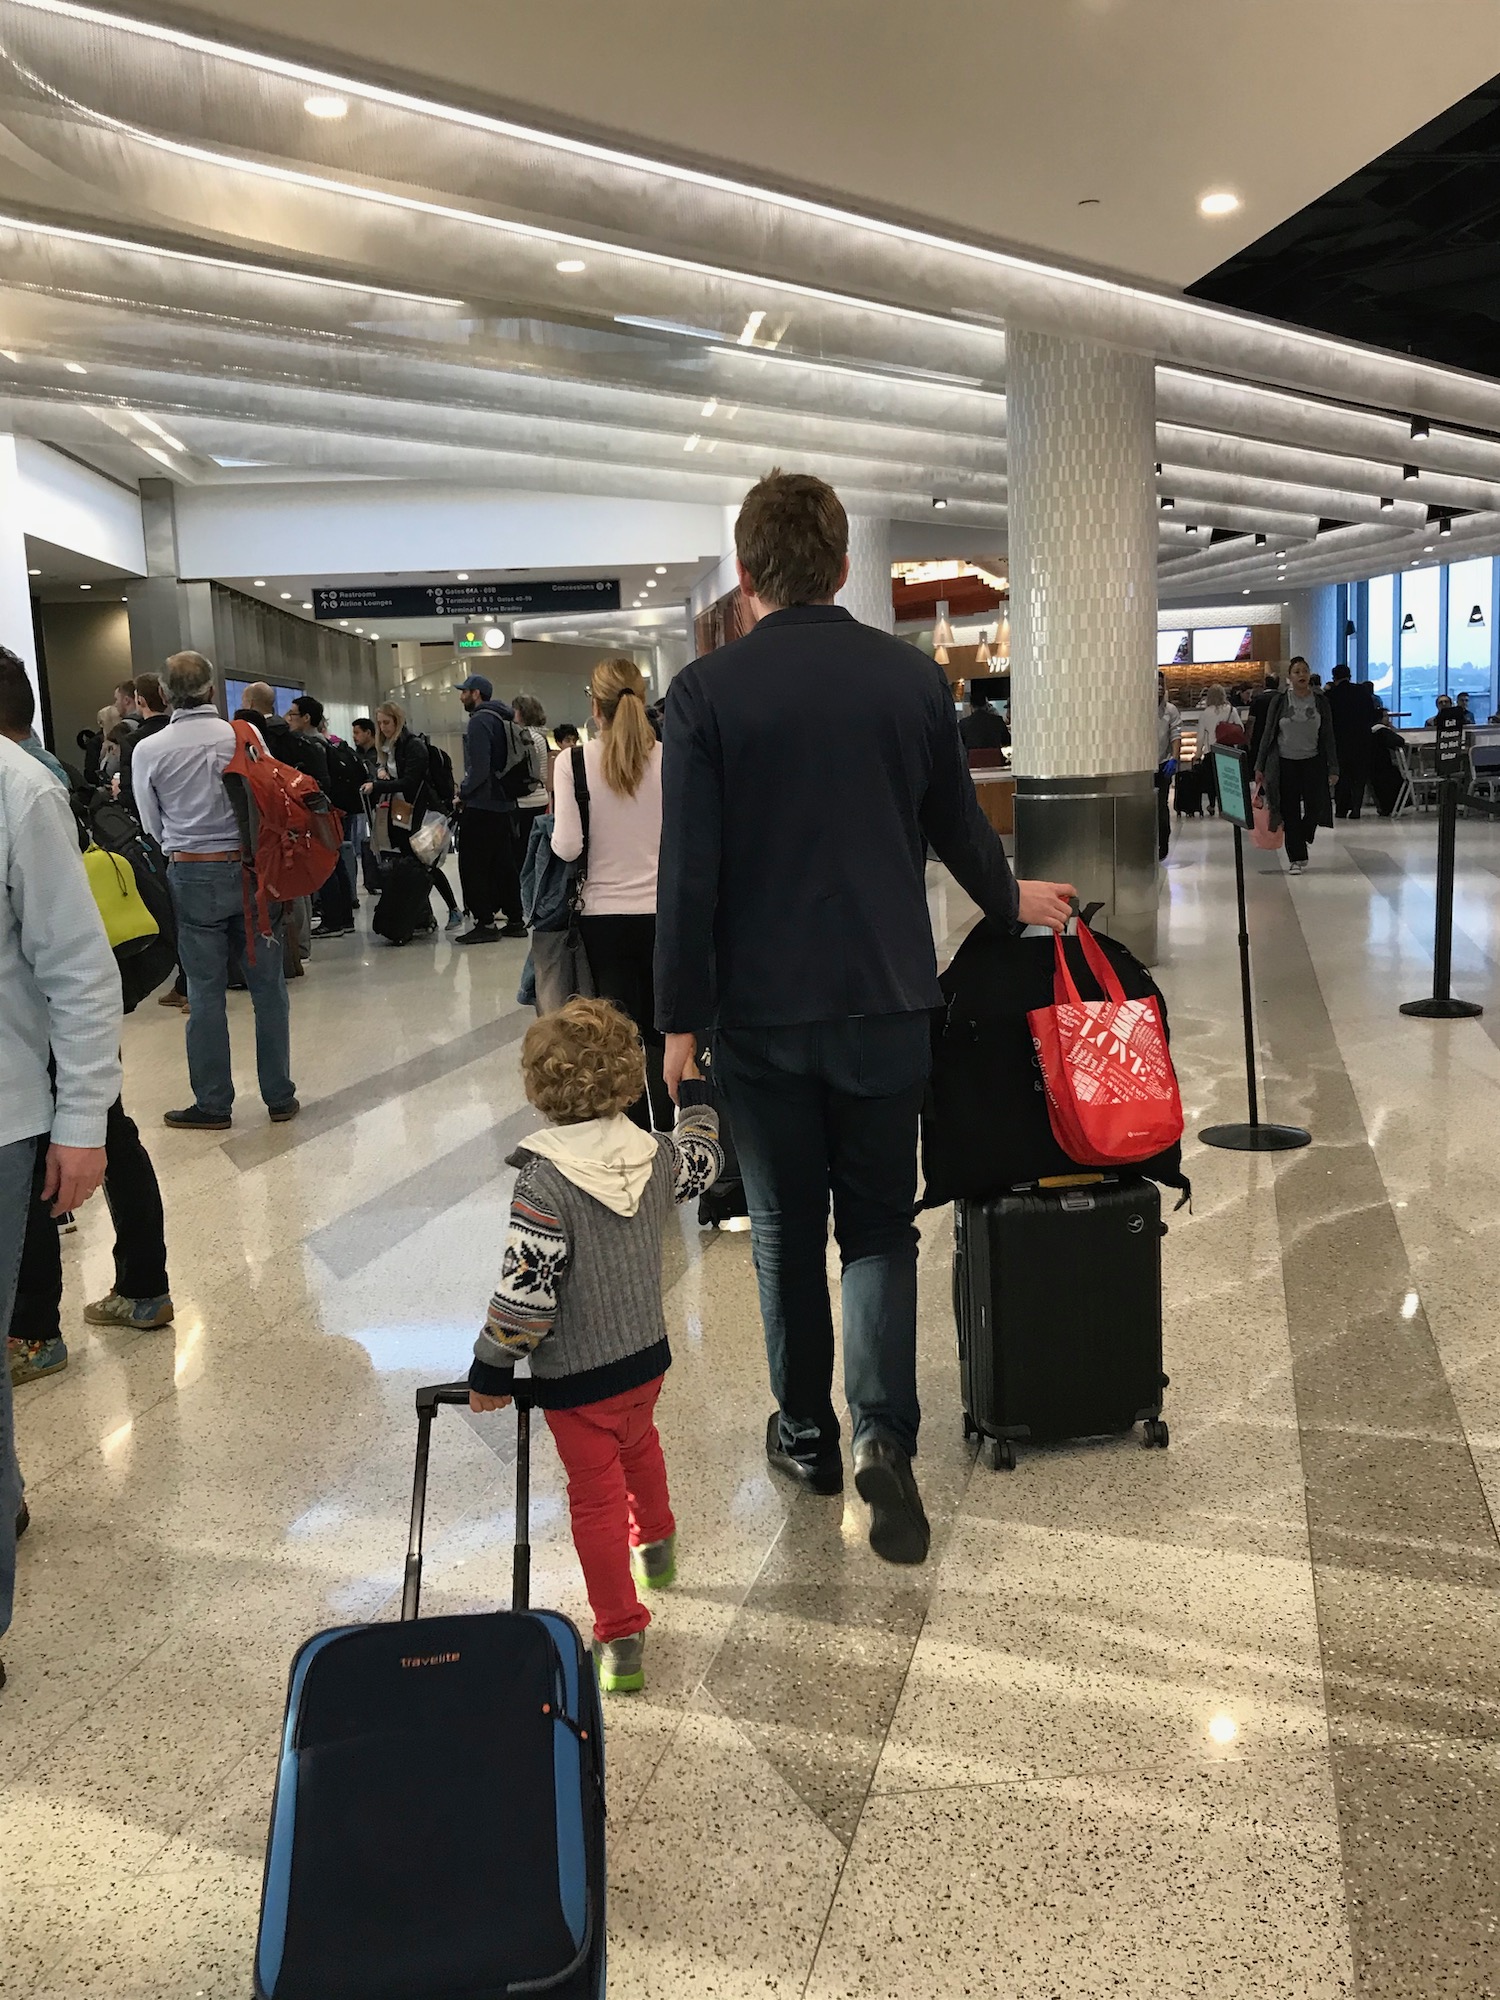 a man and child walking with luggage in an airport